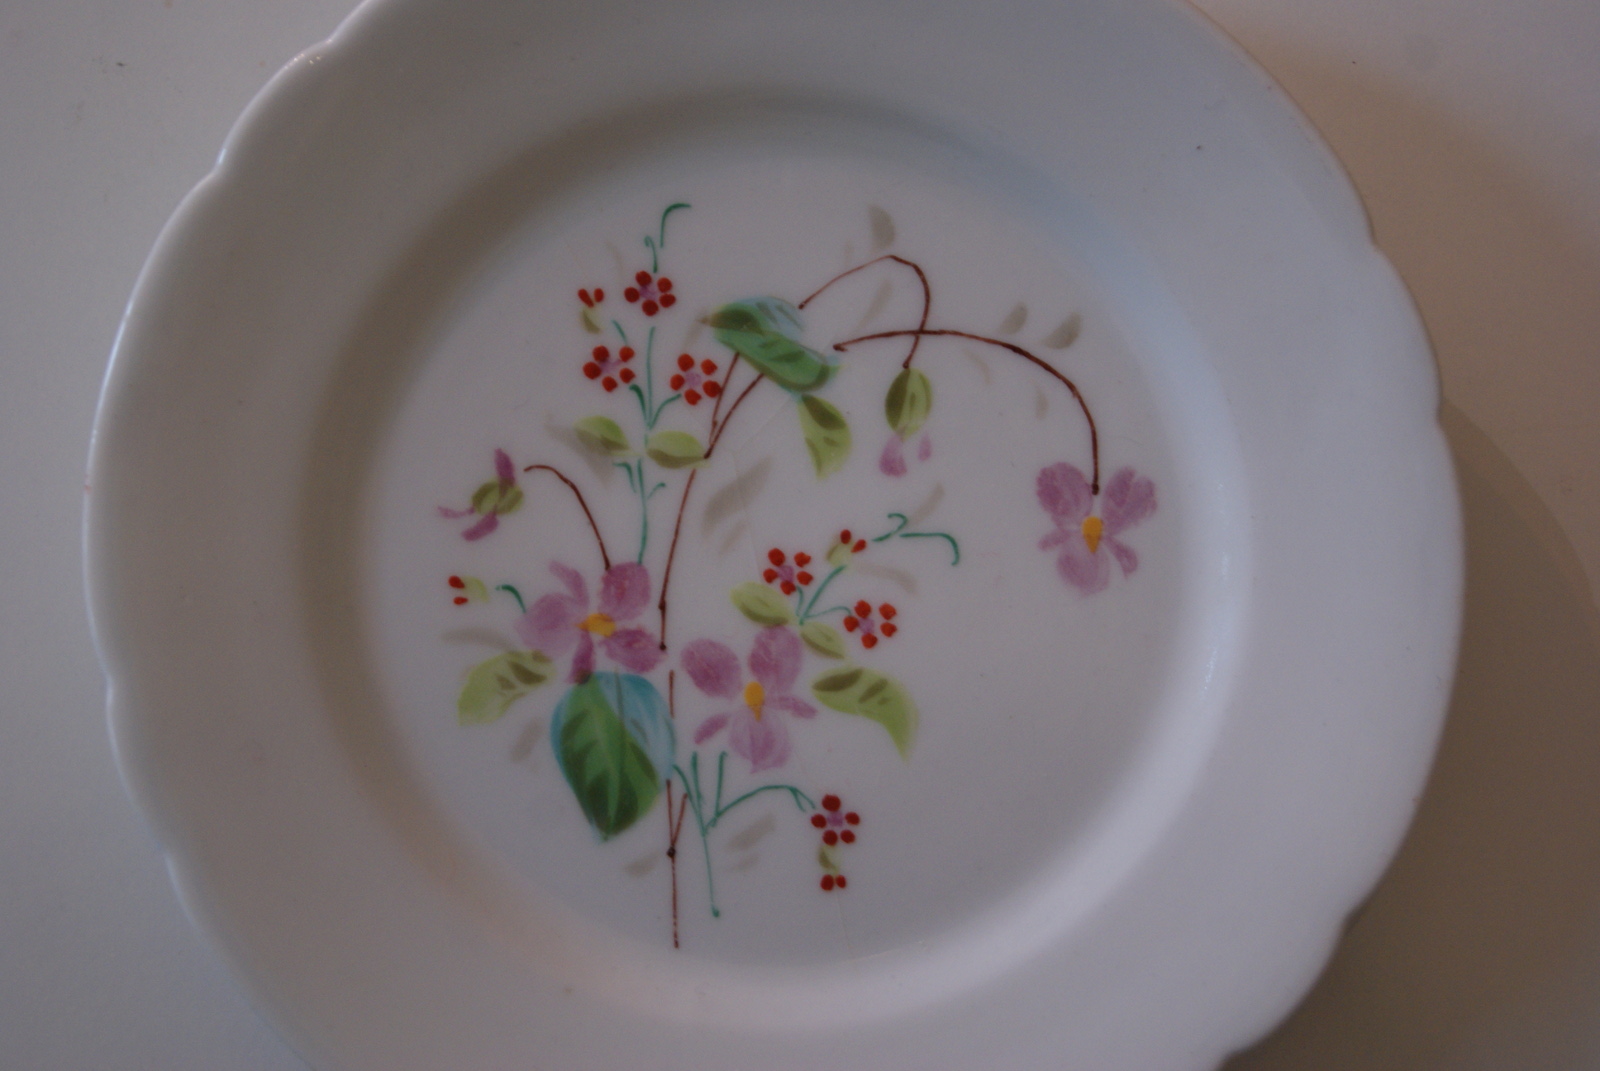 Fraureuth plate with flowers, pink and red flowers with leaves